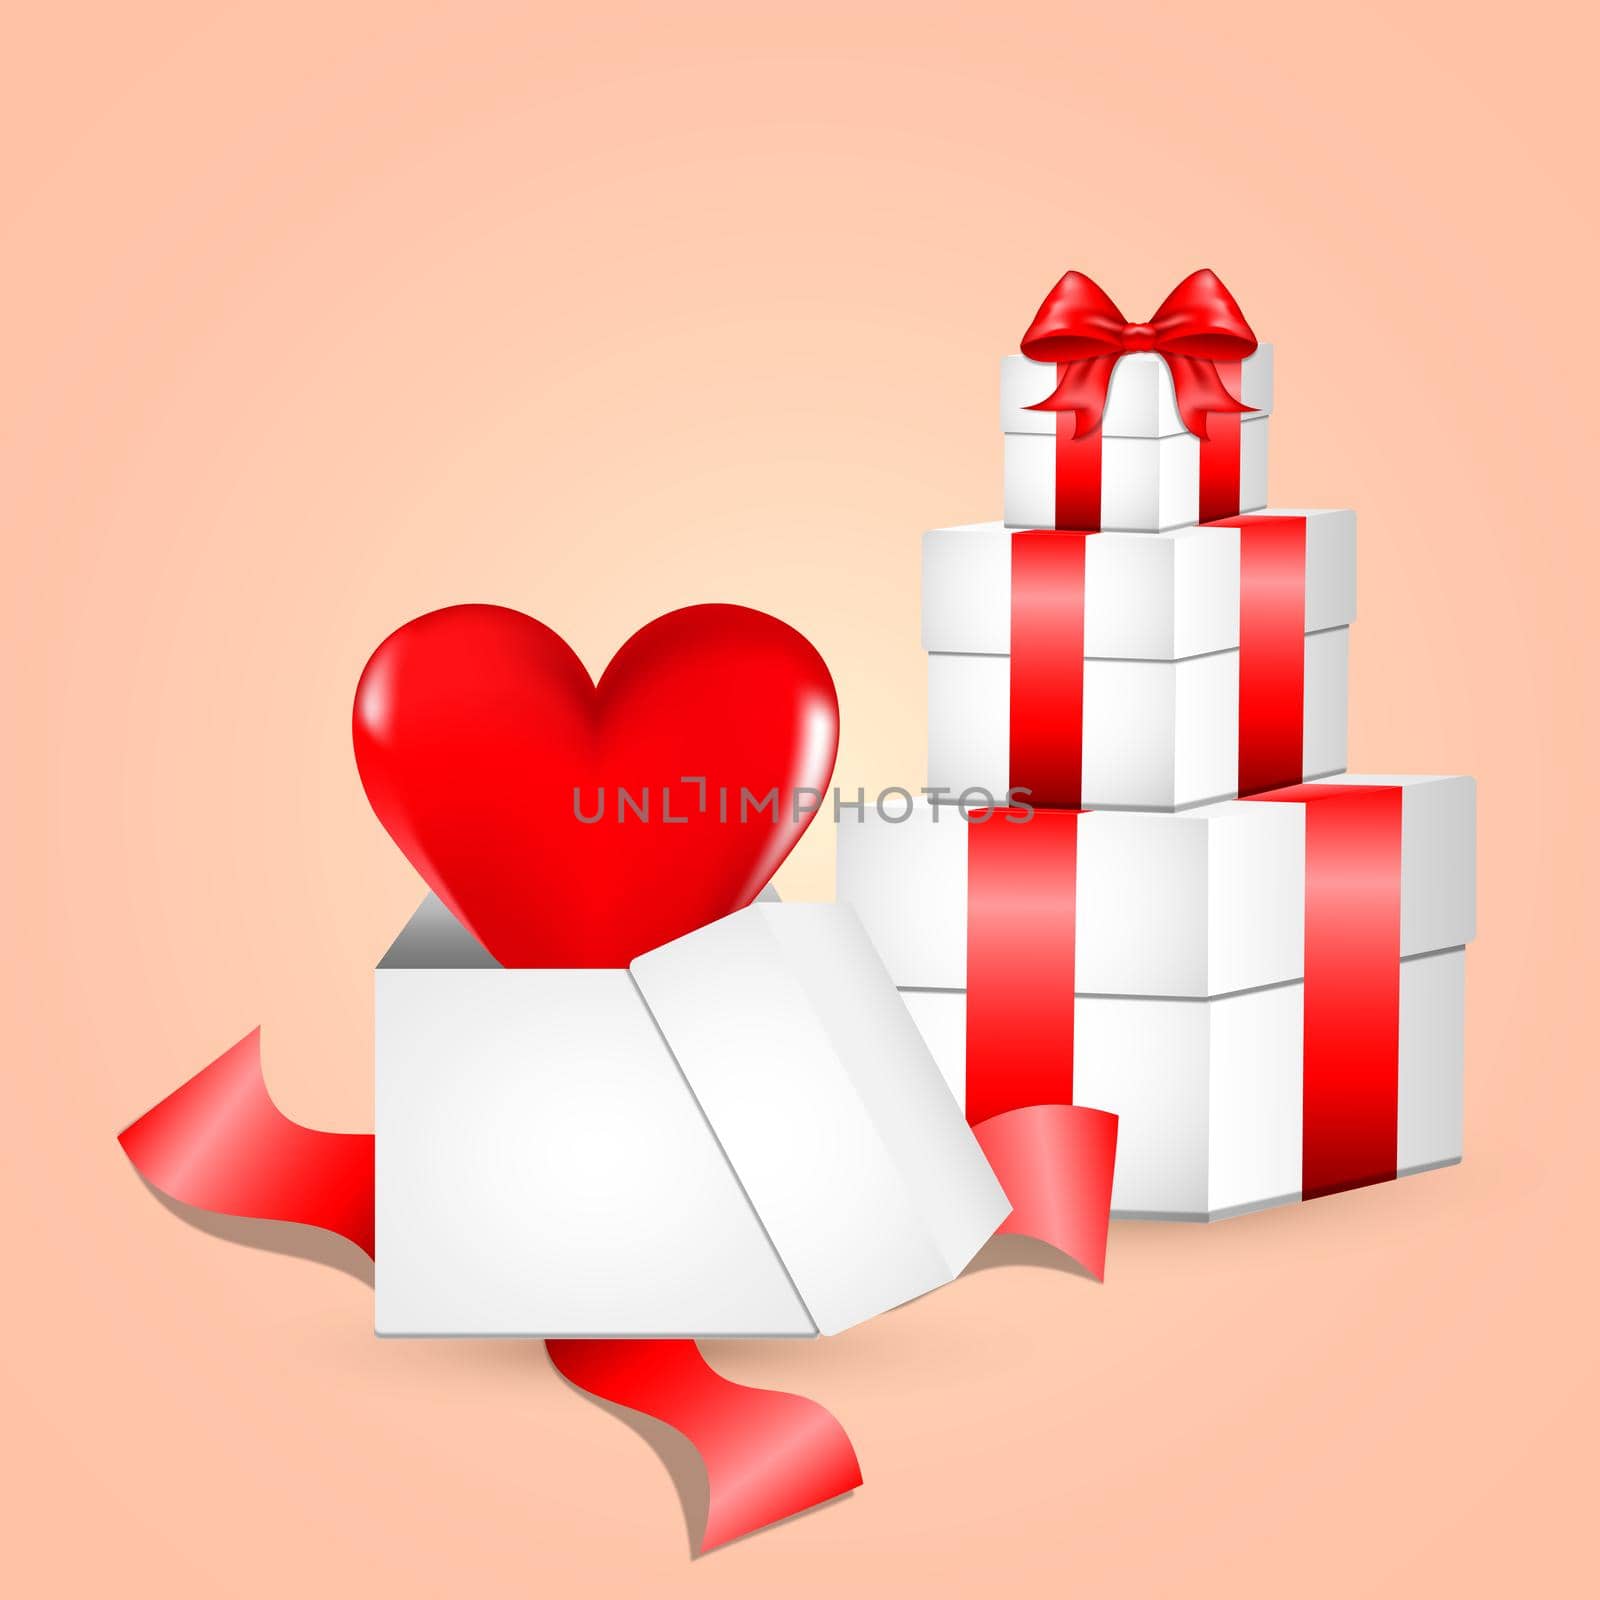 White gift box with red satin bow. A heart flies from an open gift. Tied with red wrapping tape, it stands on the surface in the front view. gift box